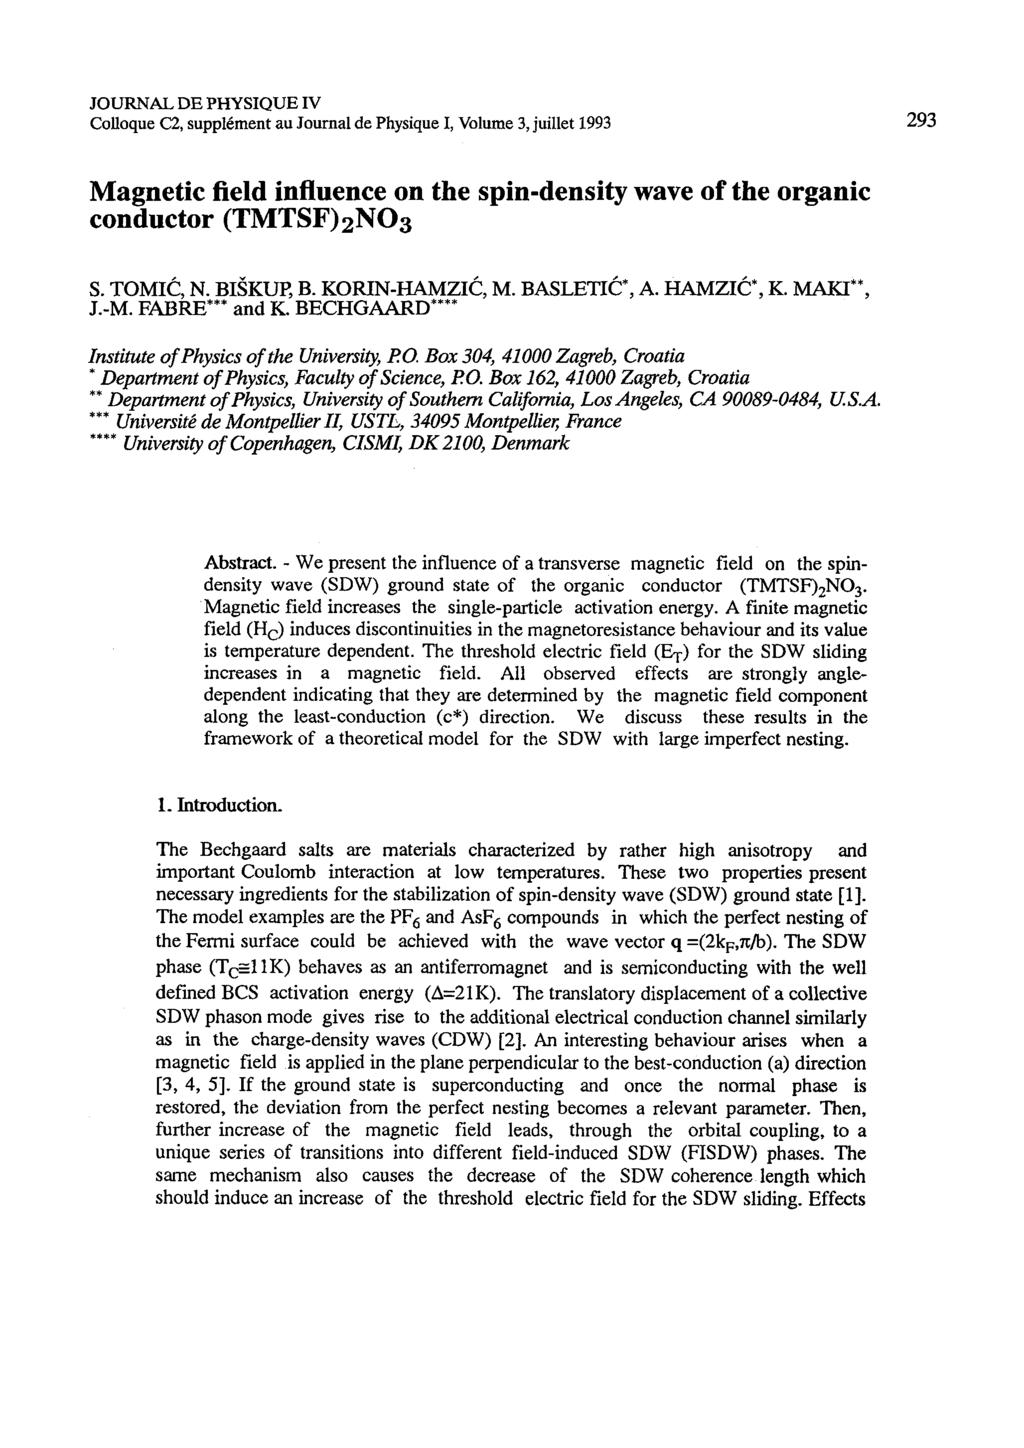 Colloque C2, supplkment au Journal de Physique I, Volume 3, juillet 1993 Magnetic field influence on the spindensity wave of the organic conductor (TMTSF) 2N03 S. TOMIC, N. BISKUP, B. KORINWZIC, M.